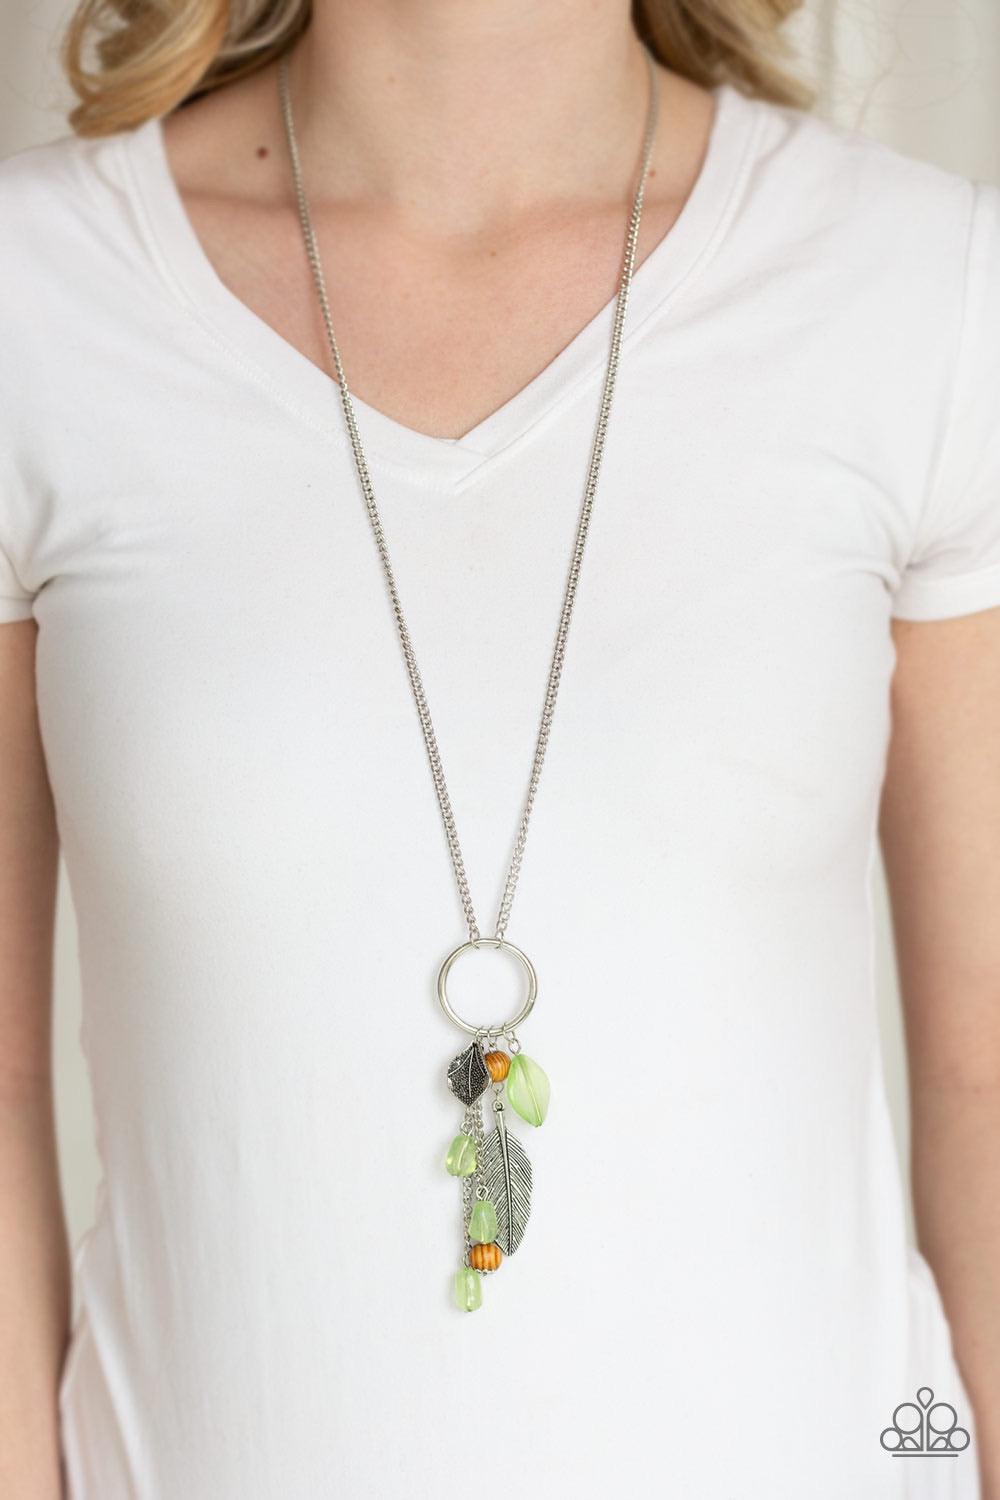 Paparazzi Accessories Sky High Style - Green Infused with shimmery silver chains, a collection of earthy brown beads, cloudy green beads, and glistening silver feather charms swing from the bottom of a bold silver hoop. The whimsical tassel attaches to a